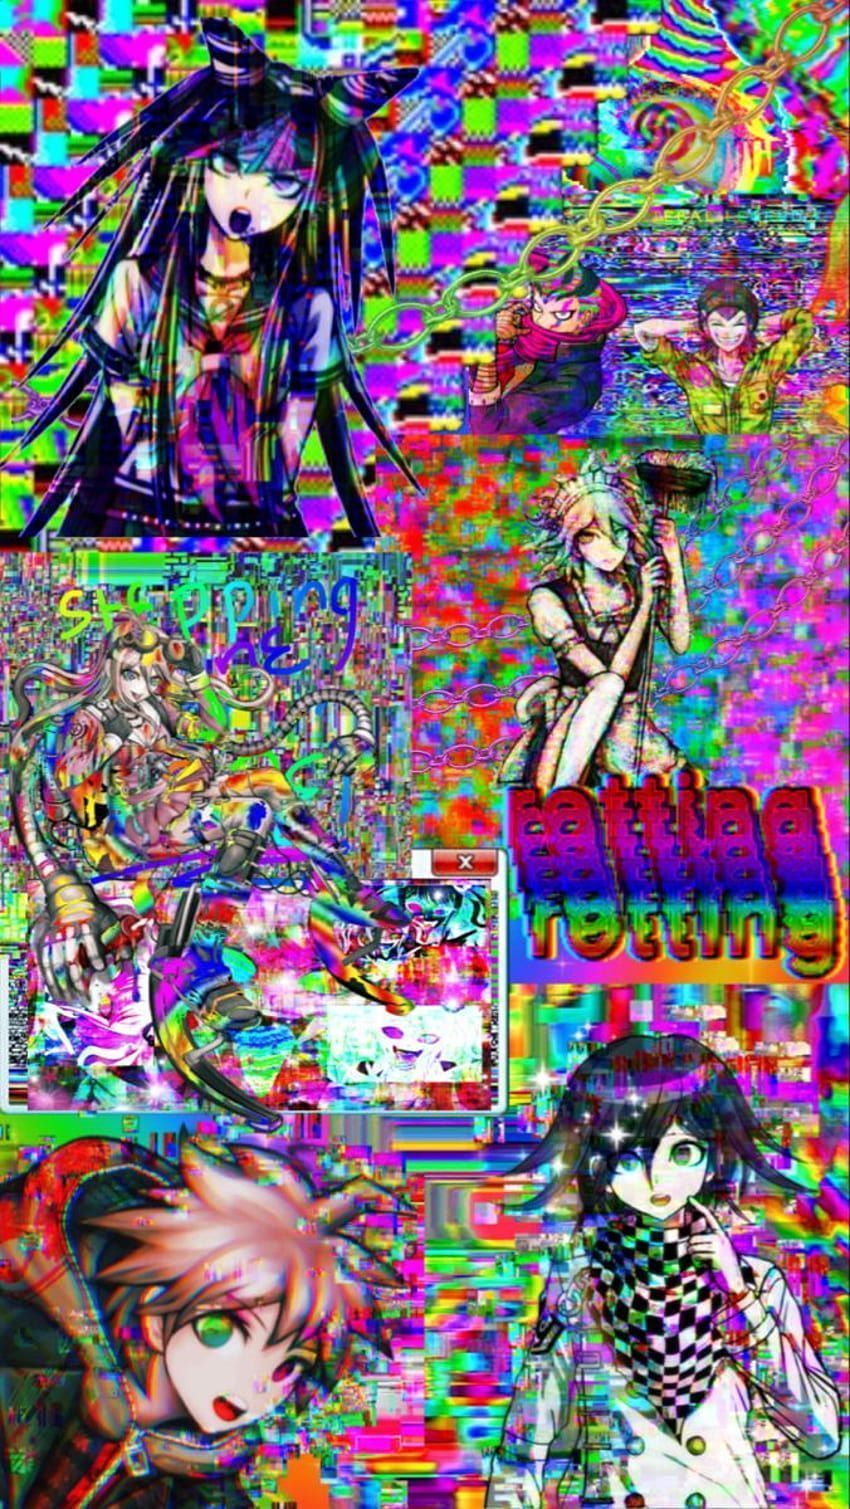 A collection of anime characters in different colors - Glitchcore